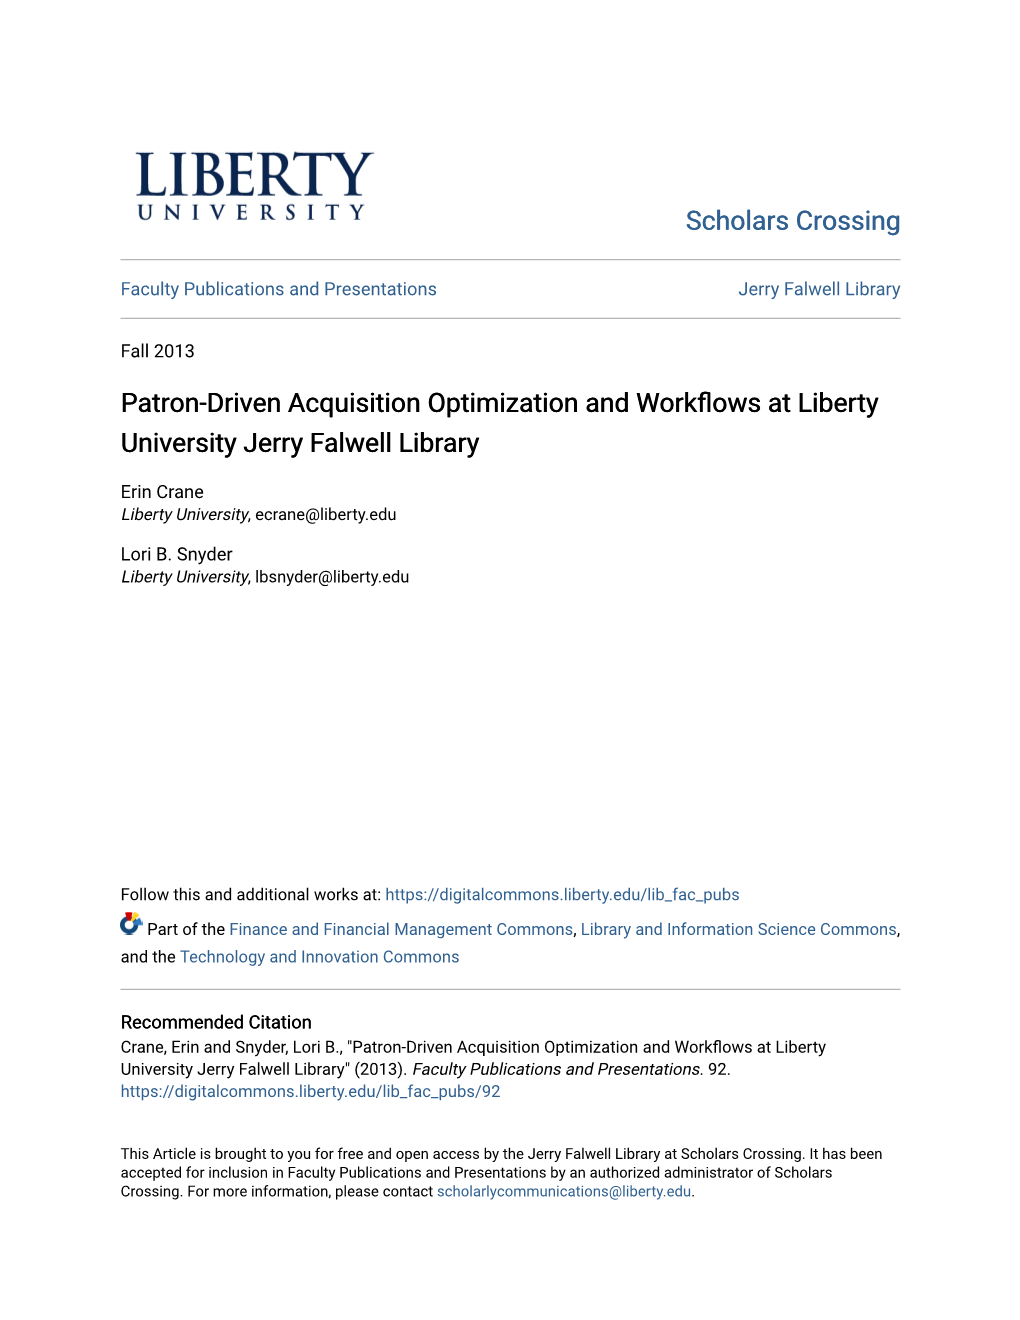 Patron-Driven Acquisition Optimization and Workflows at Liberty University Jerry Falwell Library